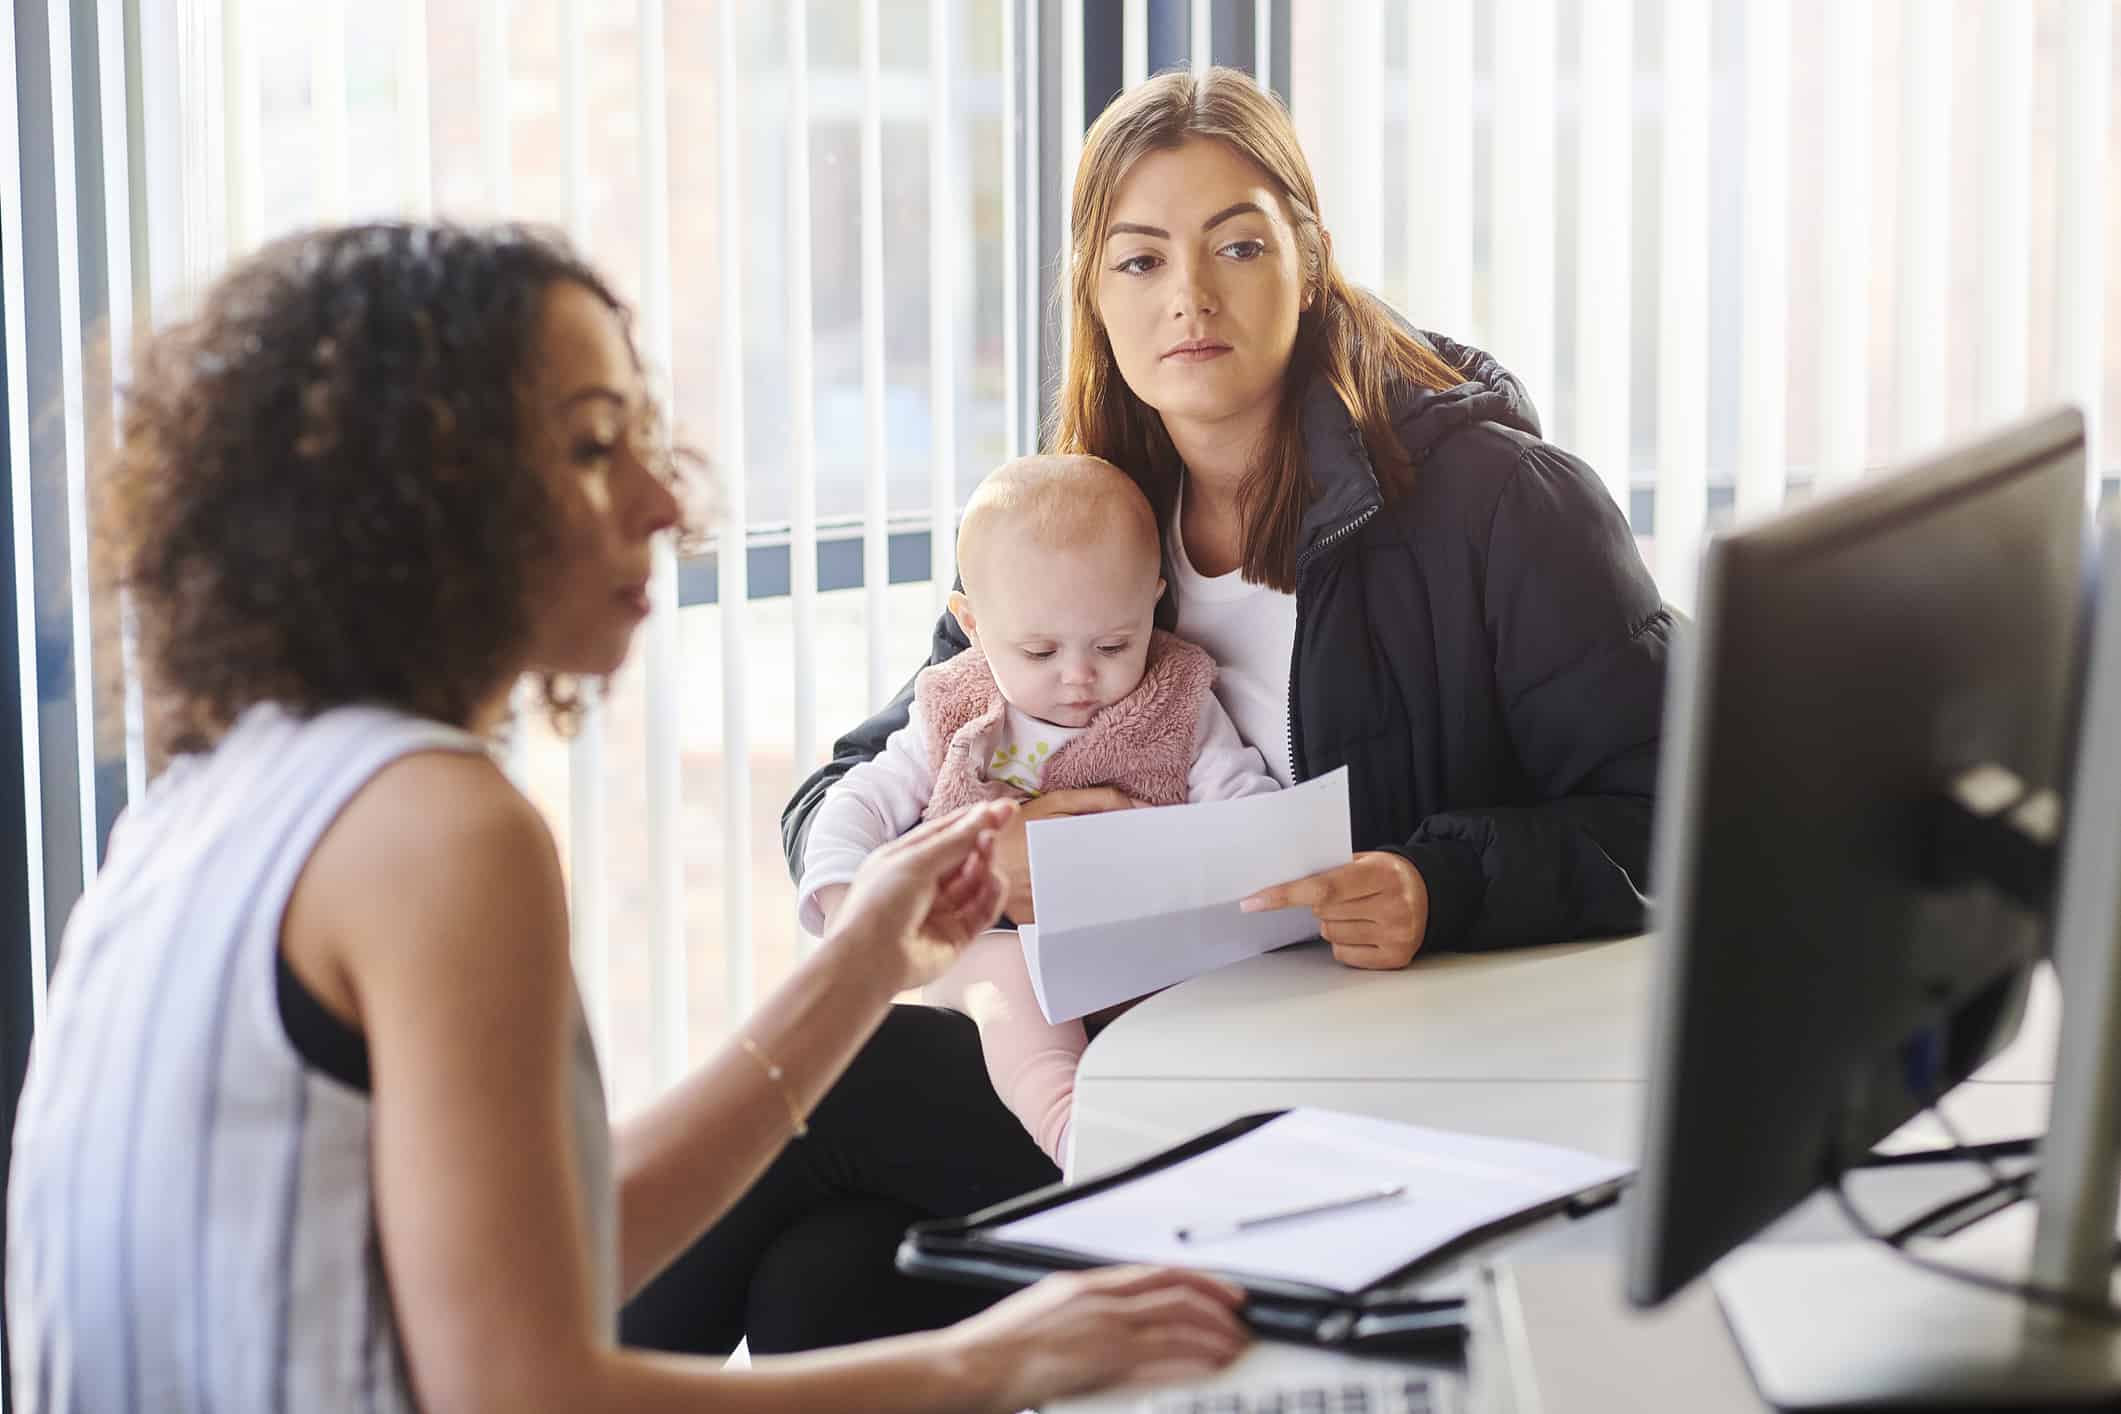 Young mom with her baby in her lap being shown something on a computer screen by a professional woman